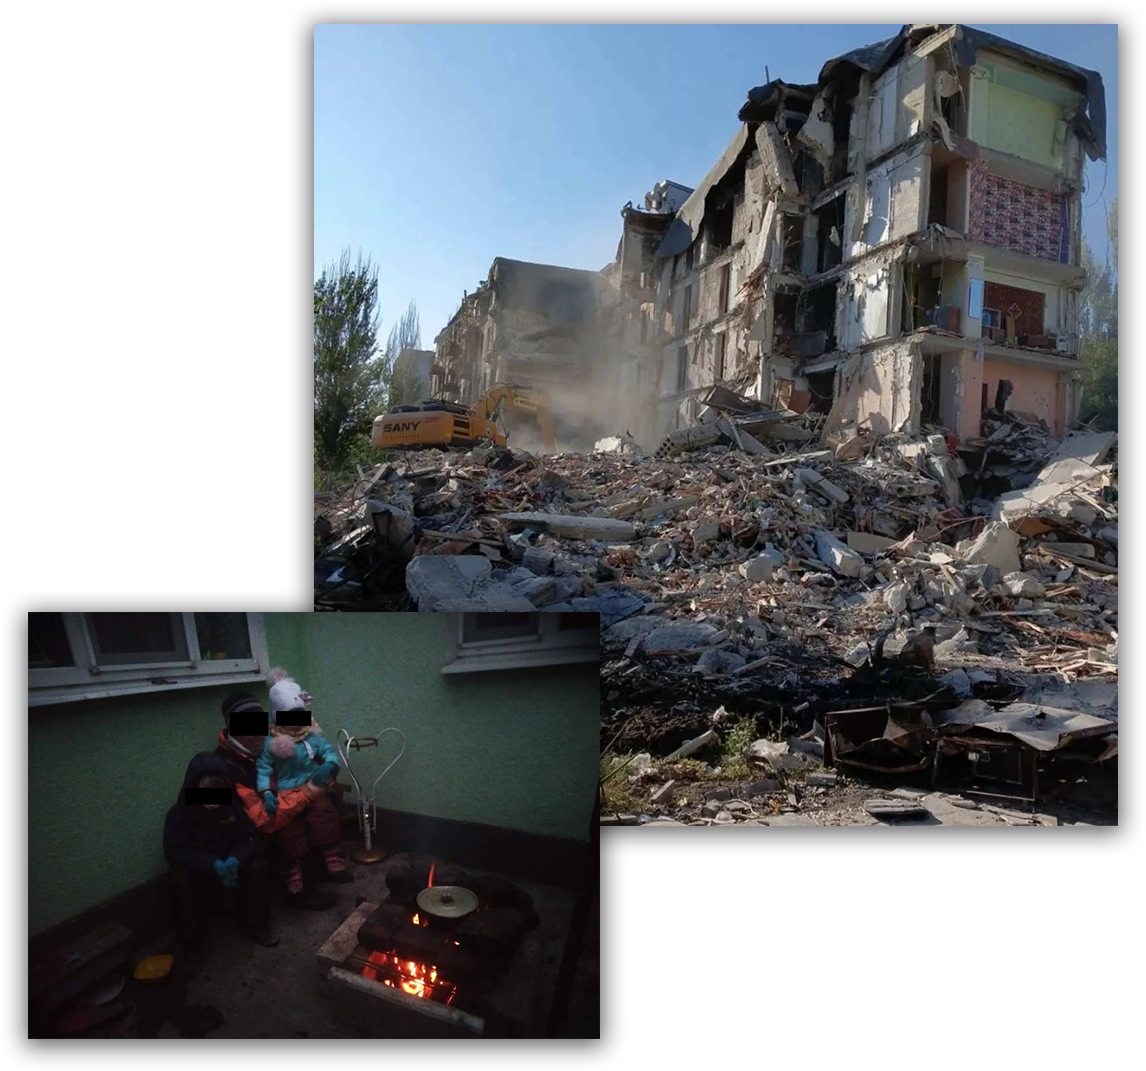 Two photos: A pot is heated over a small fire as a three children sit around it. A digger moves rubble next to a group of buildings are torn down half-way.